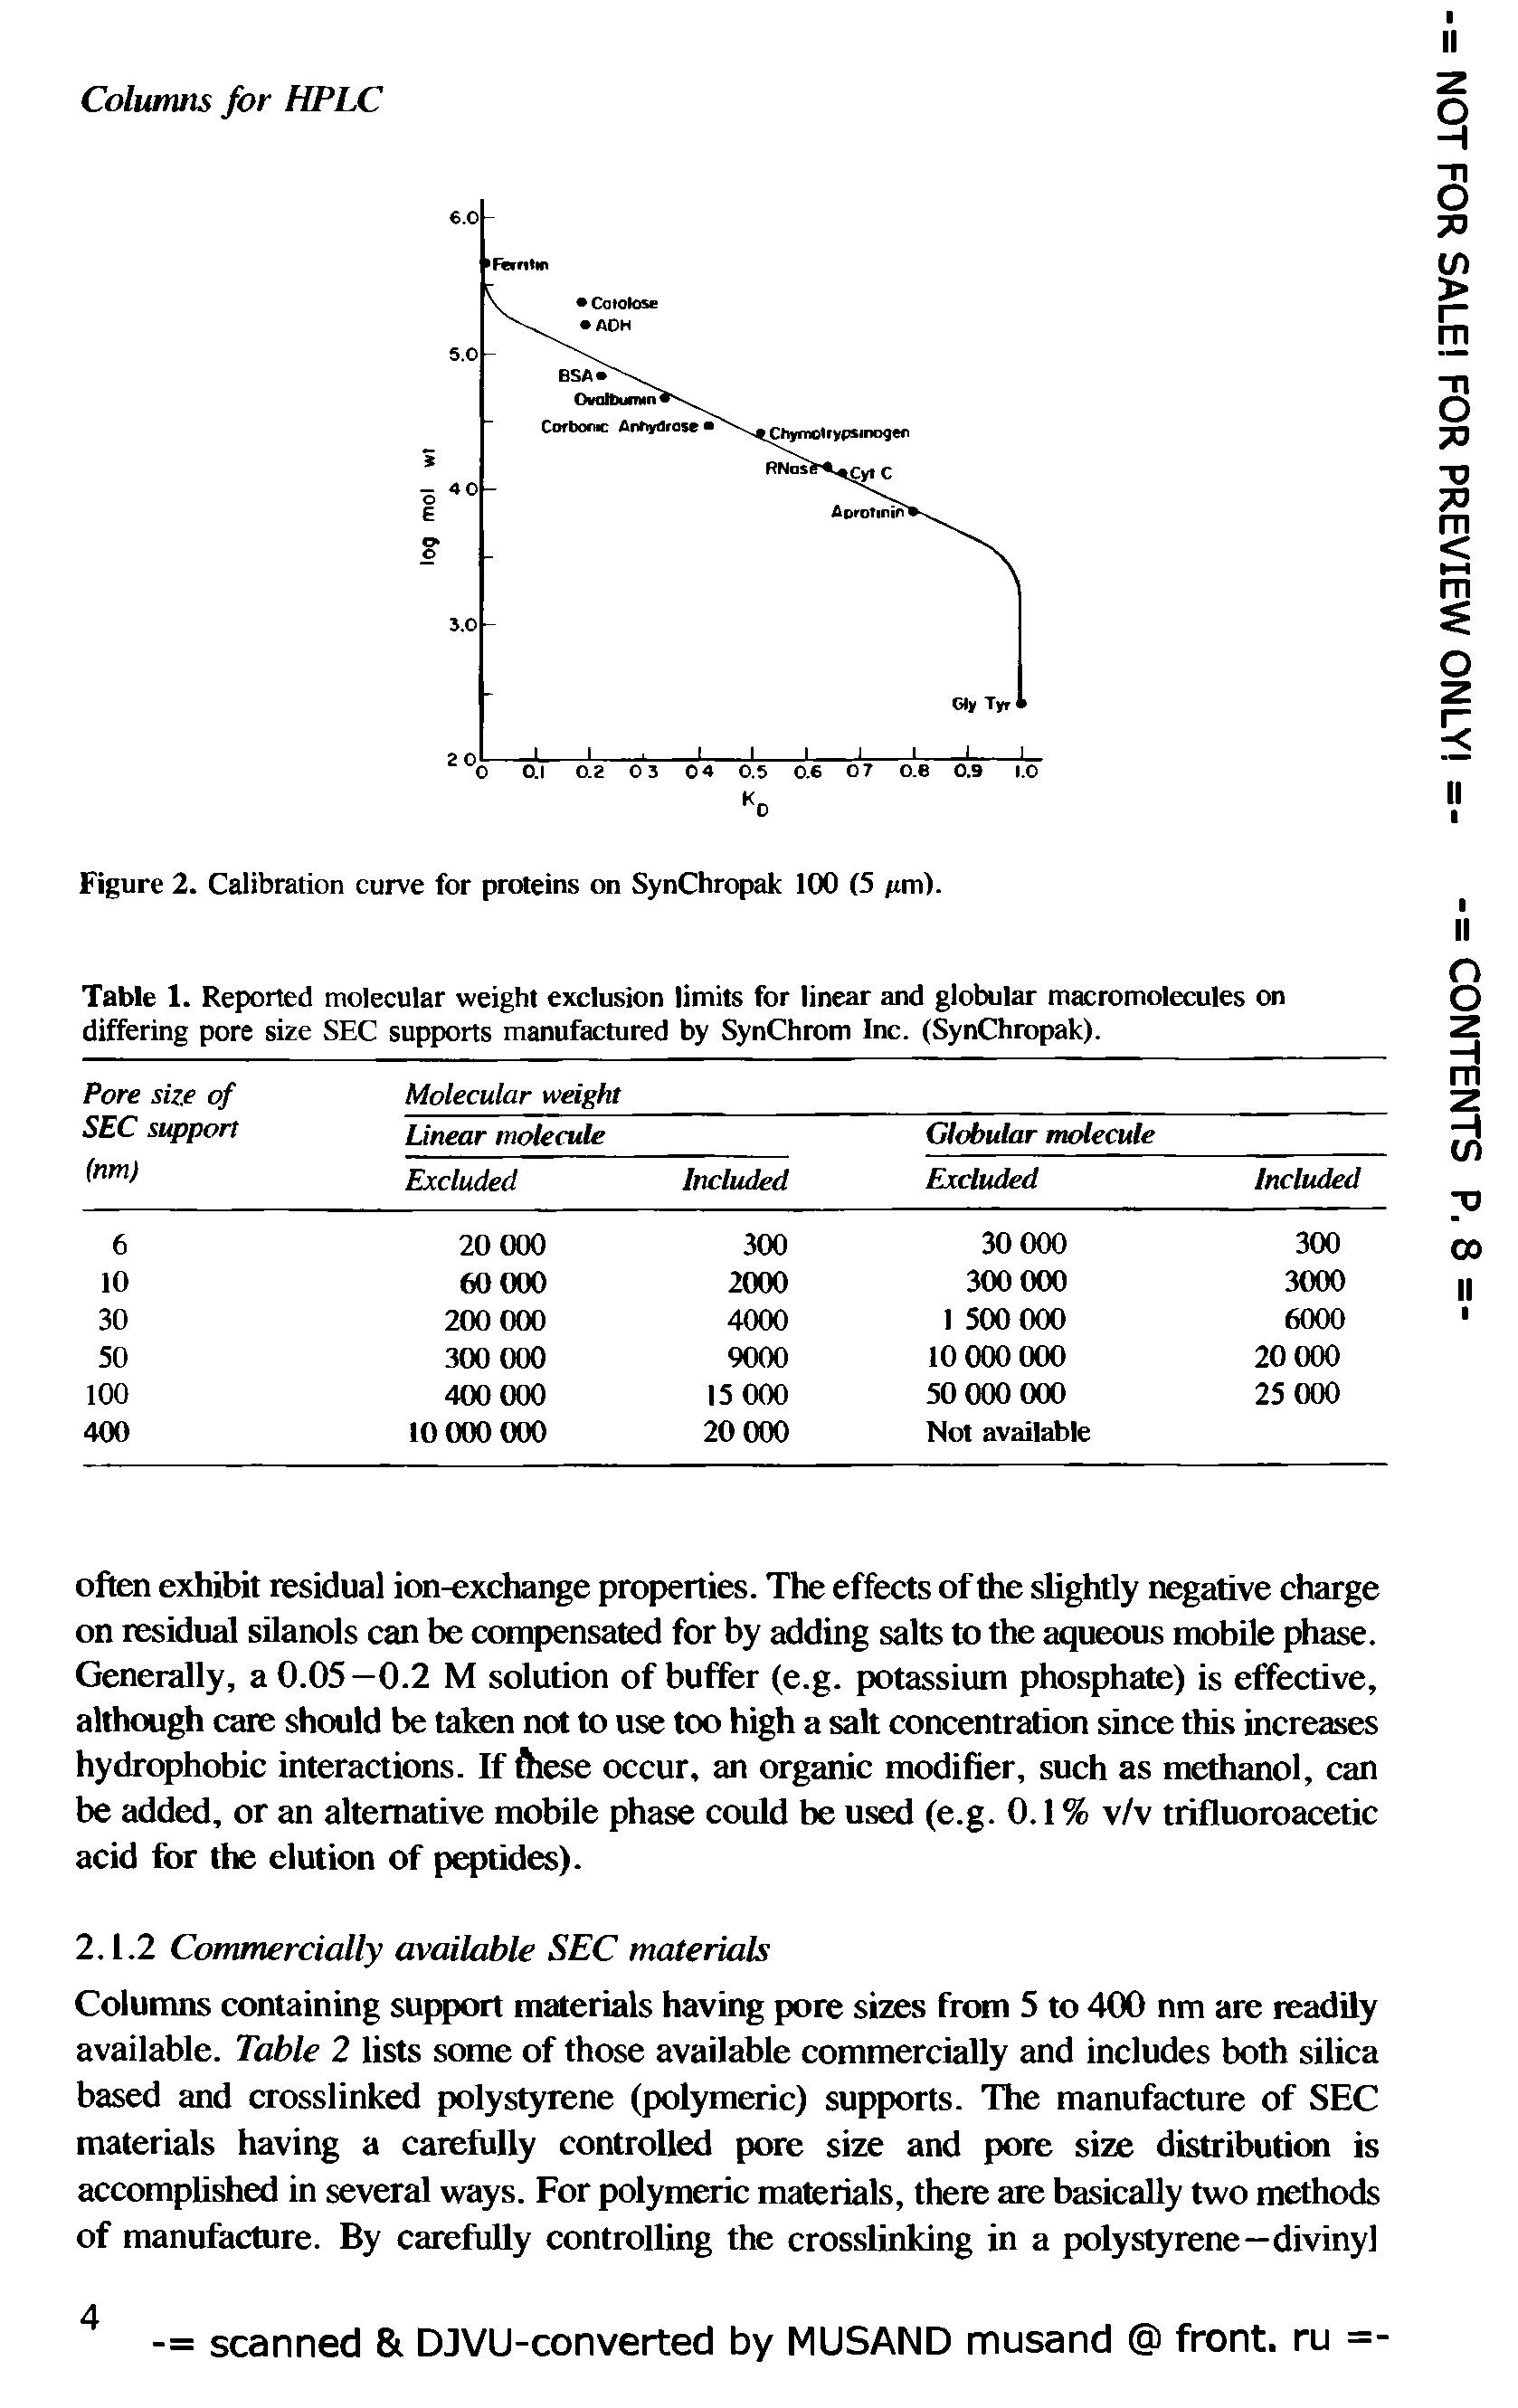 Table 1. Reported molecular weight exclusion limits for linear and globular macromolecules on differing pore size SEC supports manufactured by SynChrom Inc. (SynChropak).